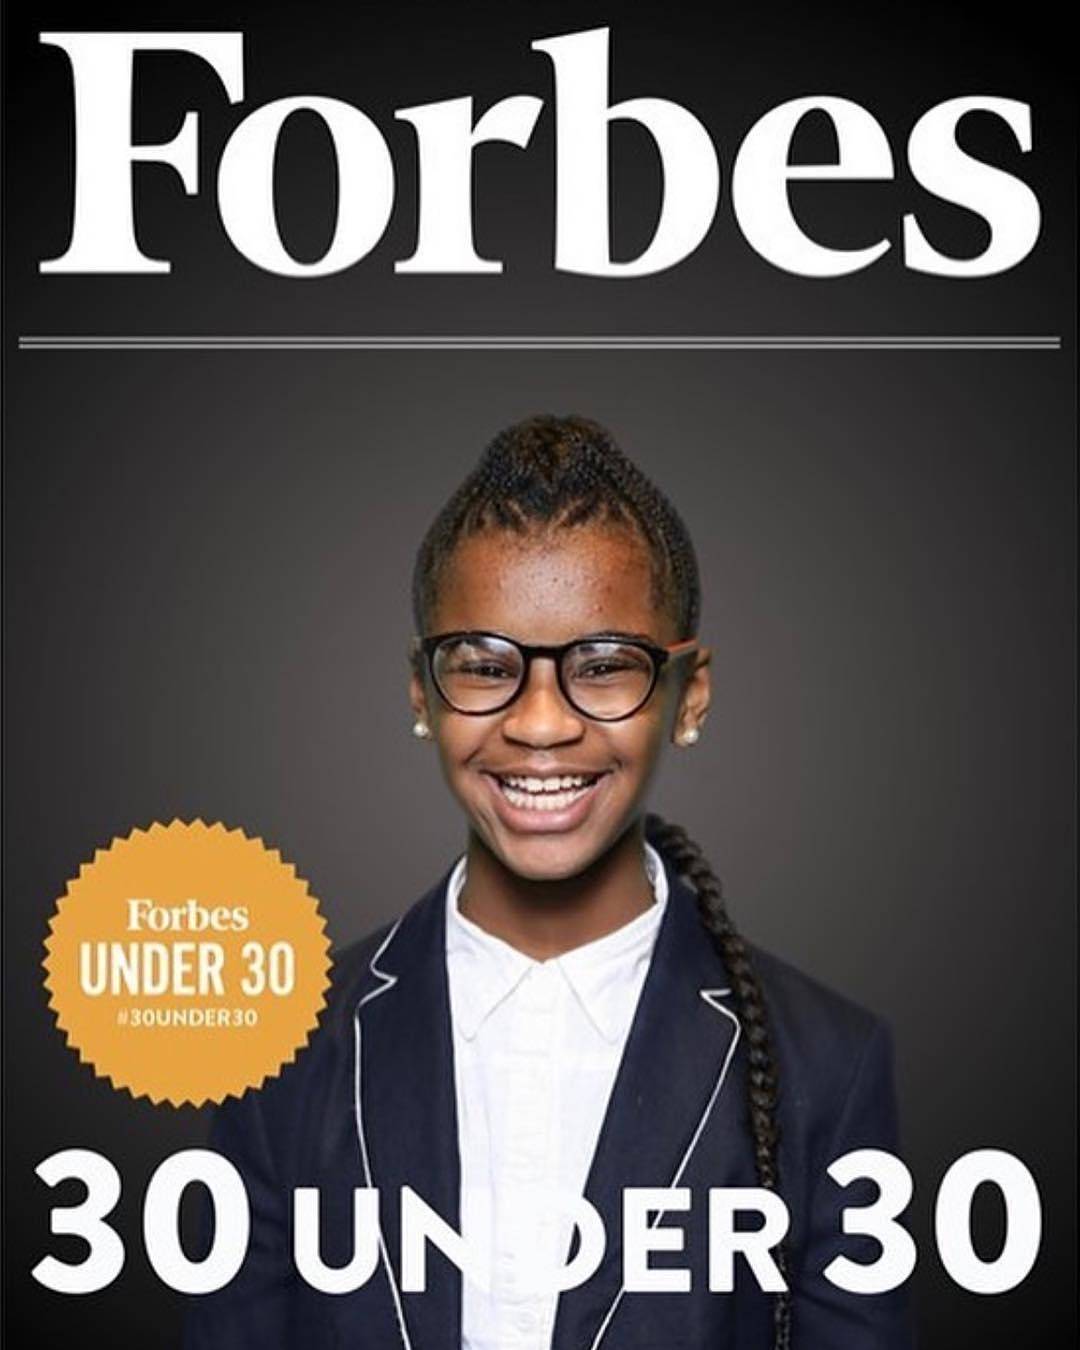 12-year-old Marley Dias is the Youngest Member on Forbes' 30 Under 30 List for 2018